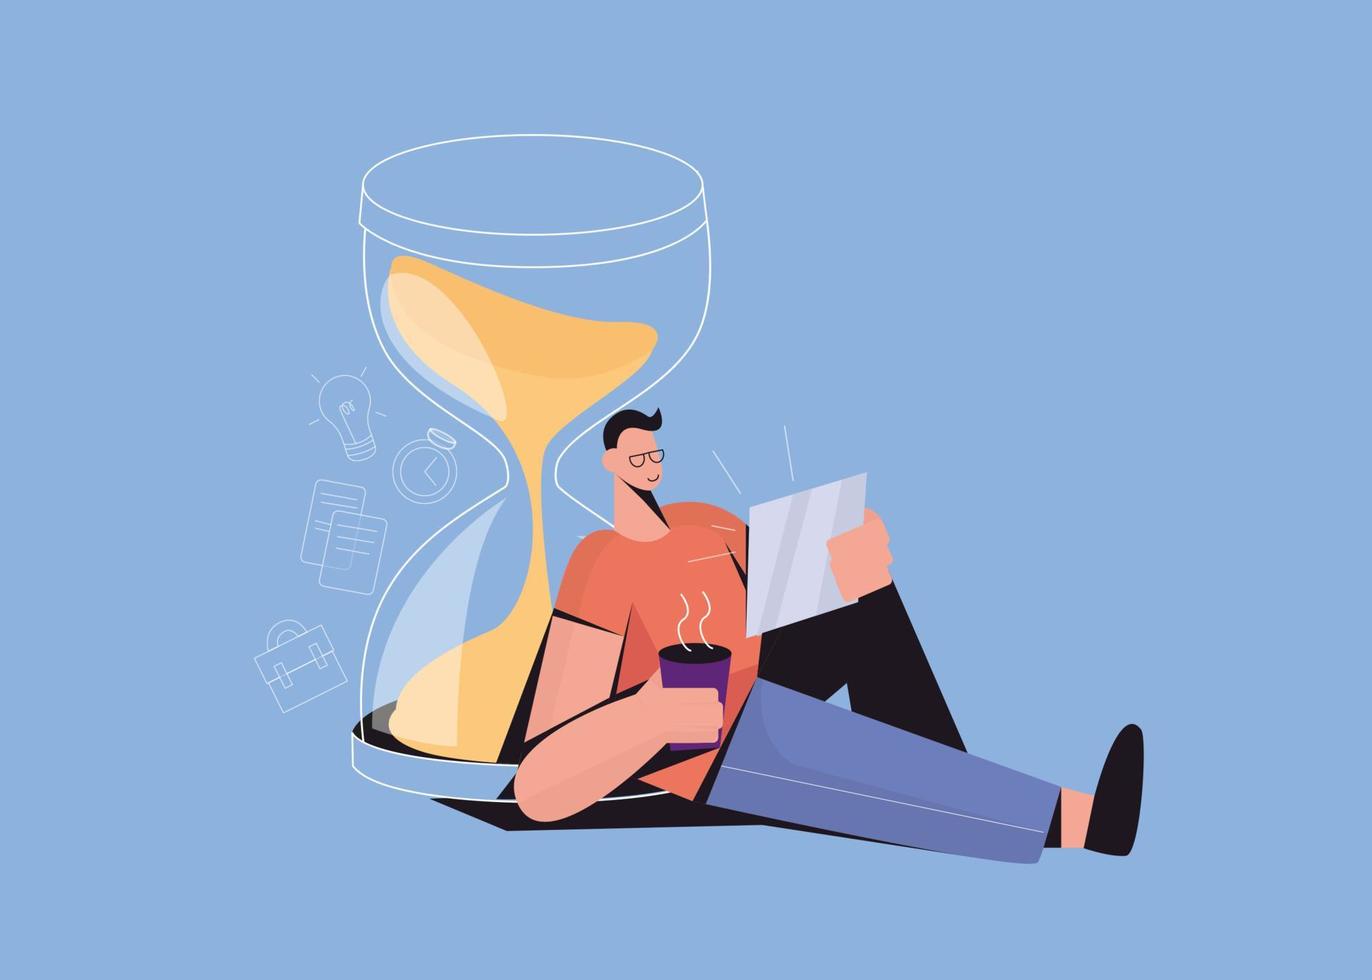 Man lean on sandglass use modern mobile tablet gadget, waste time on internet in social media. Smiling guy with device addiction, scroll browse internet. Technology era. Flat vector illustration.